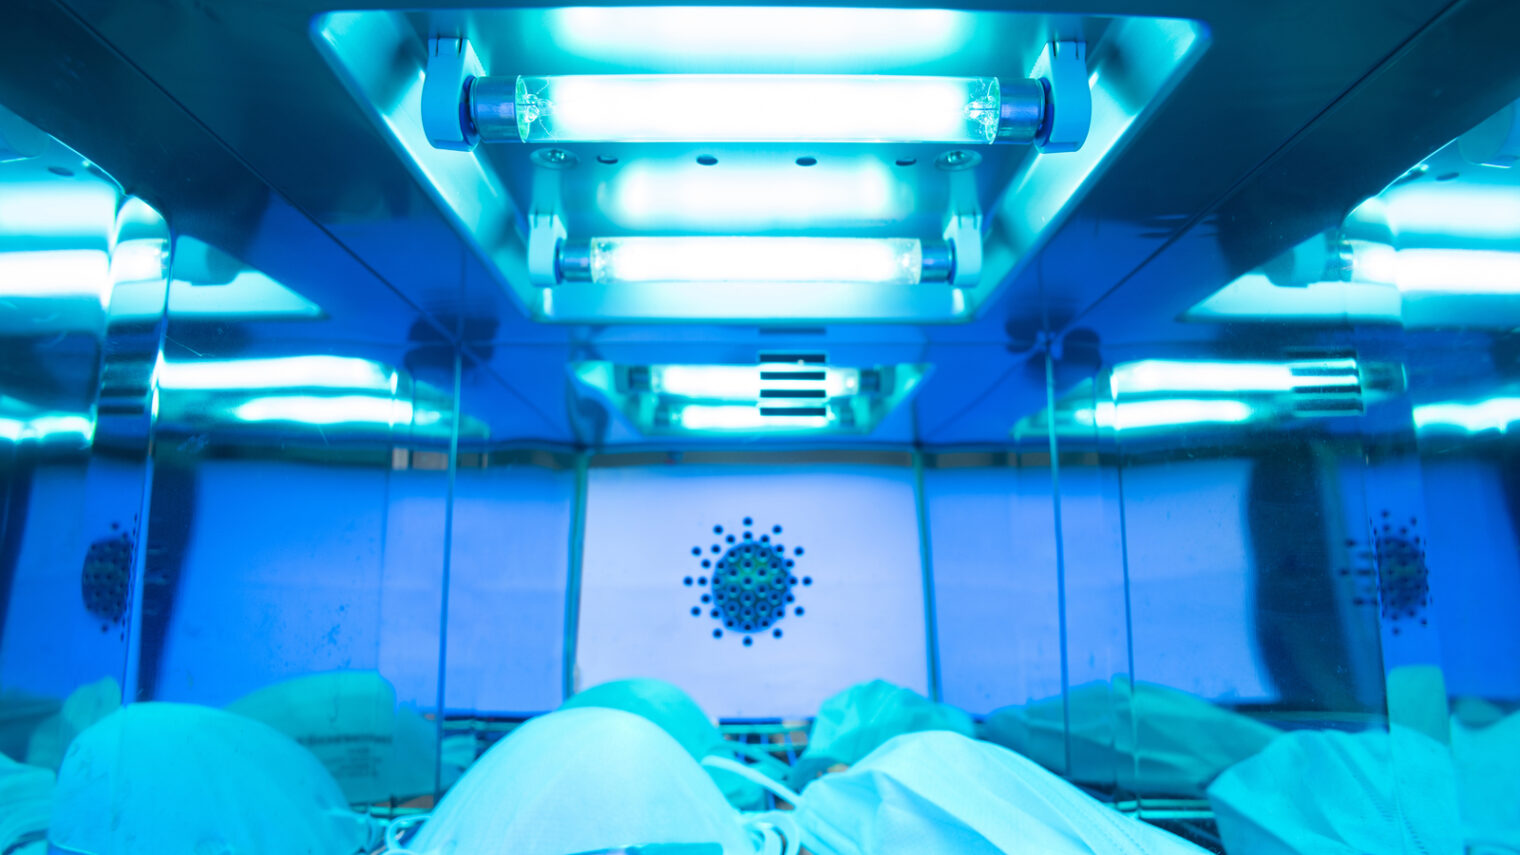 Israeli researchers discover that coronavirus can be quickly and easily killed using UV LED lights. Photo by Nor Gal via Shutterstock.com